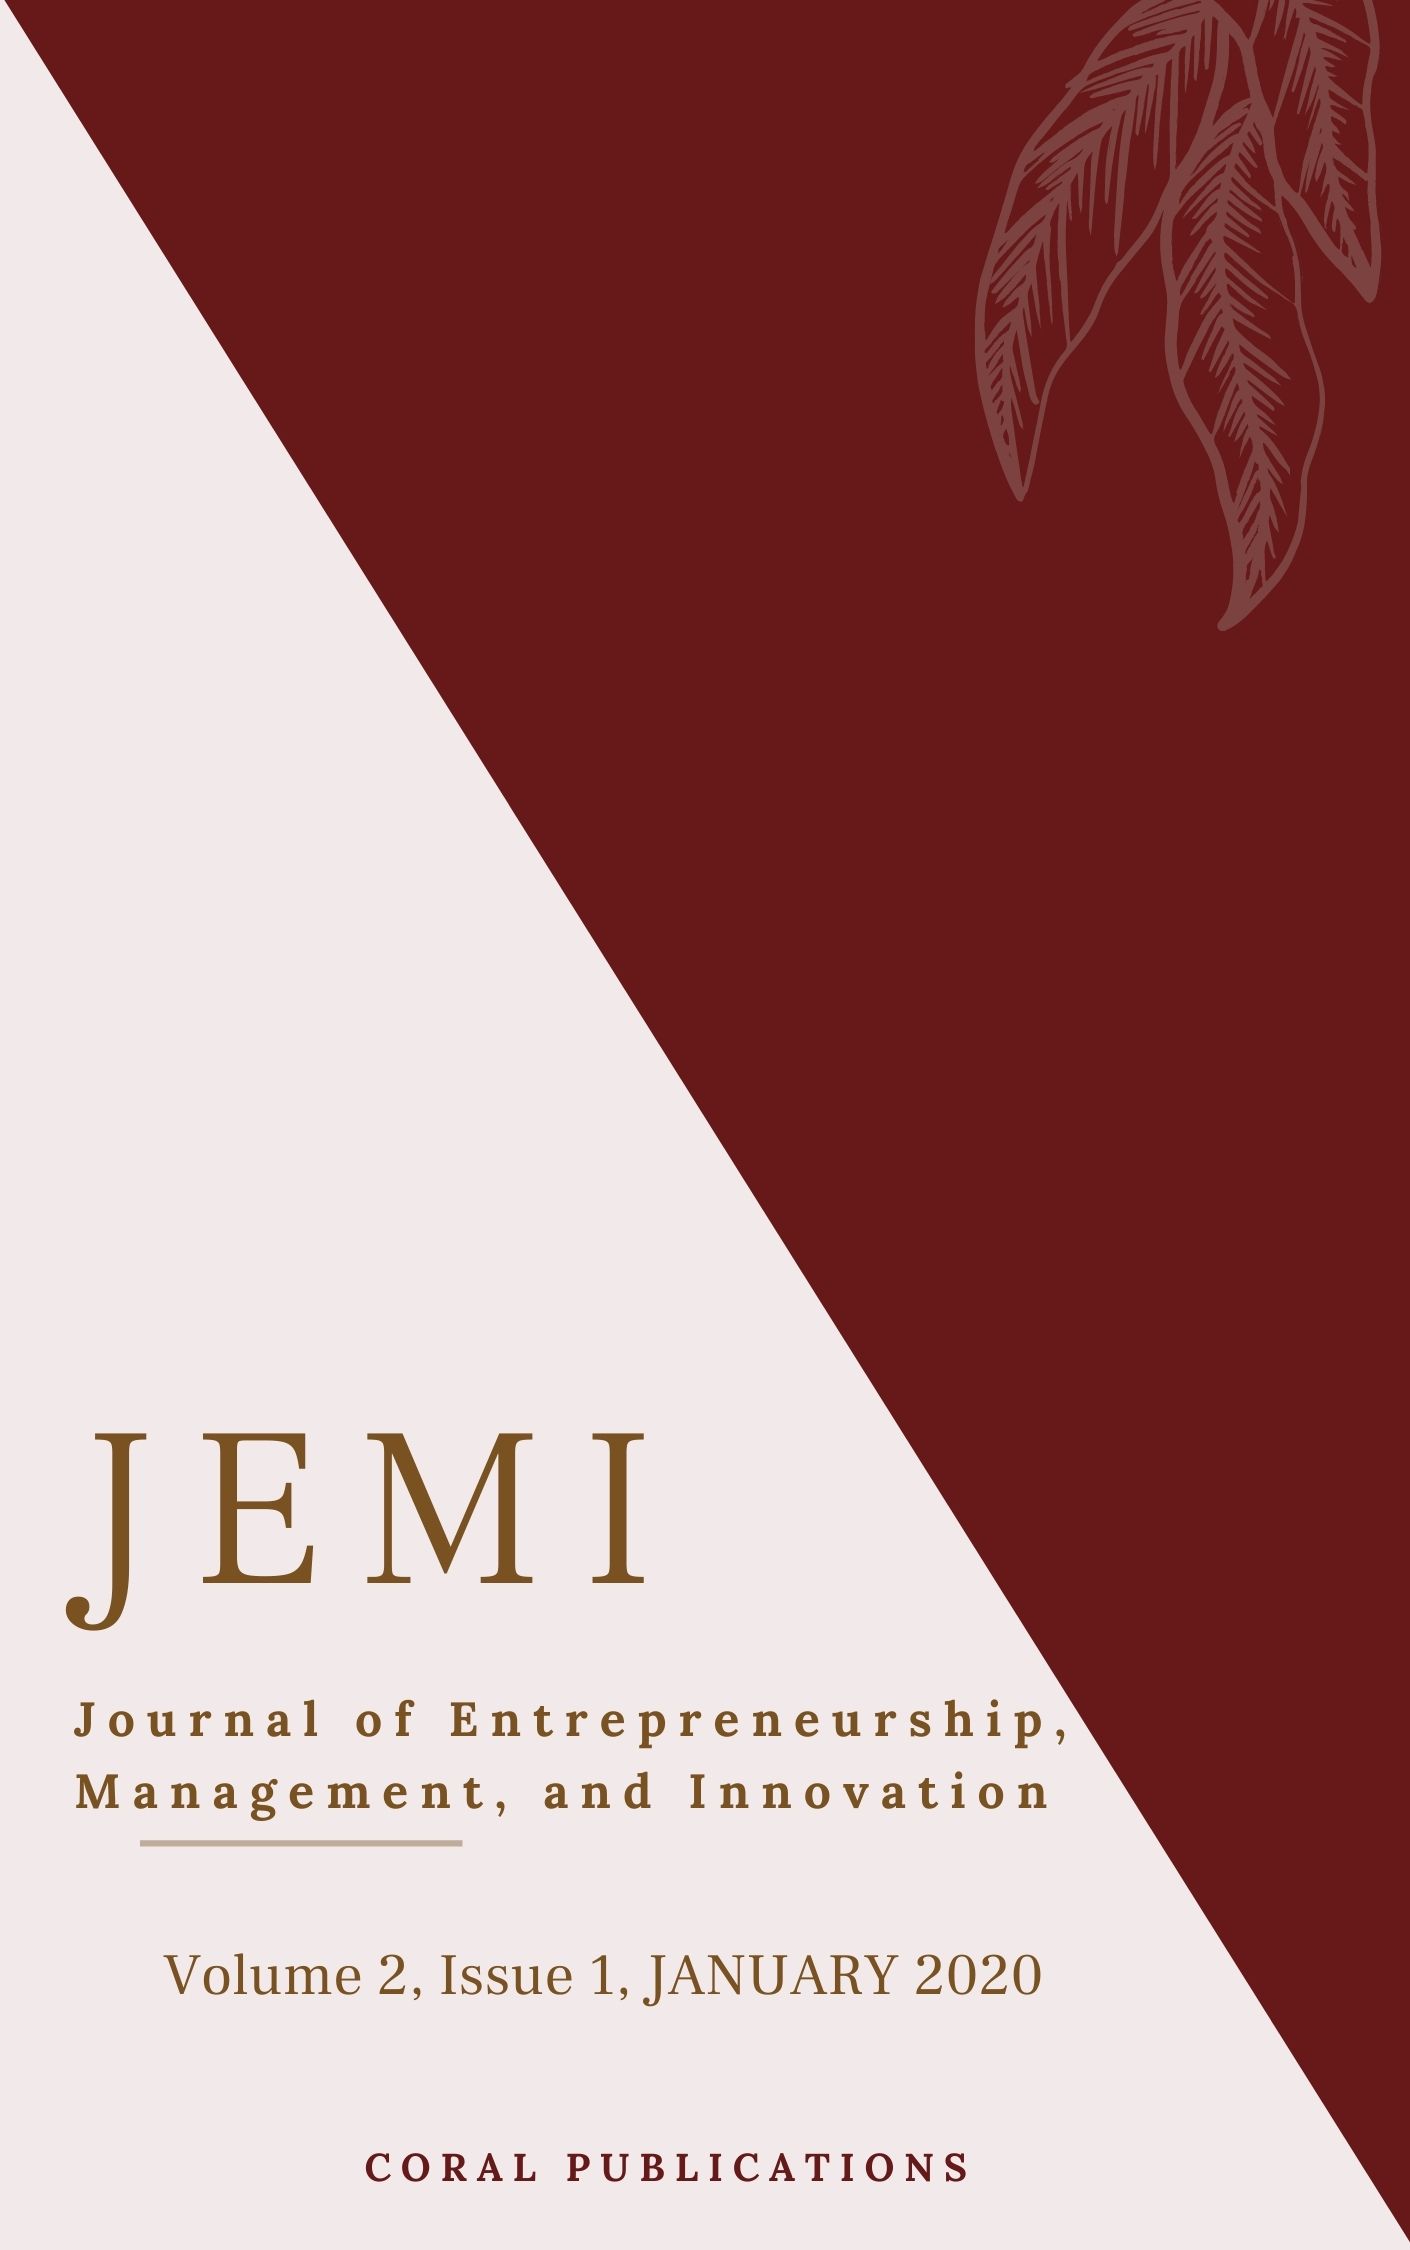 					View Vol. 2 No. 1 (2020): Journal of Entrepreneurship, Management, and Innovation, Volume 2, Issue 1, January 2020
				